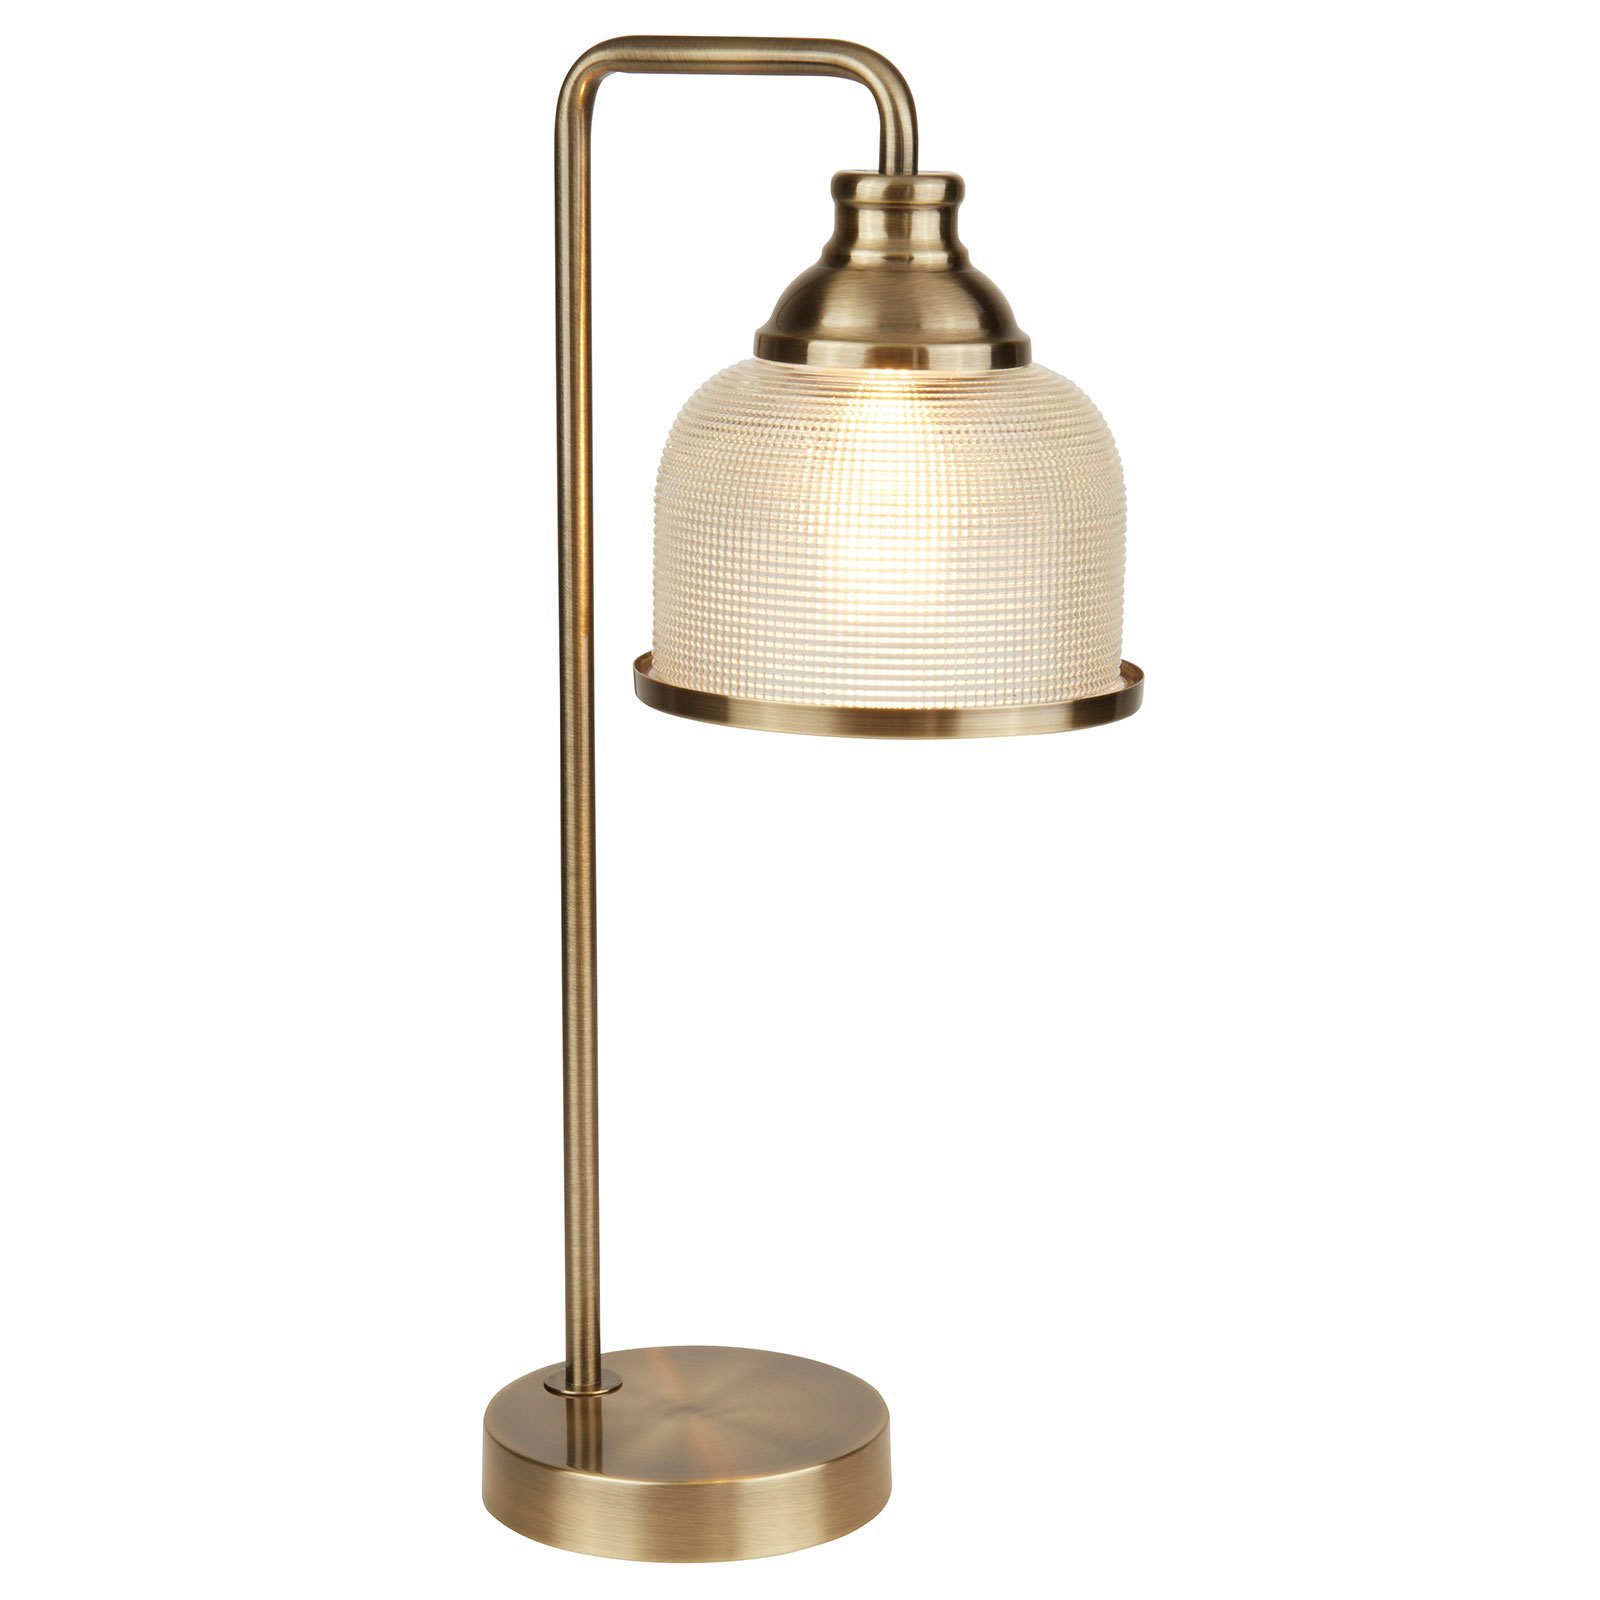 Bistro II table lamp, antique brass